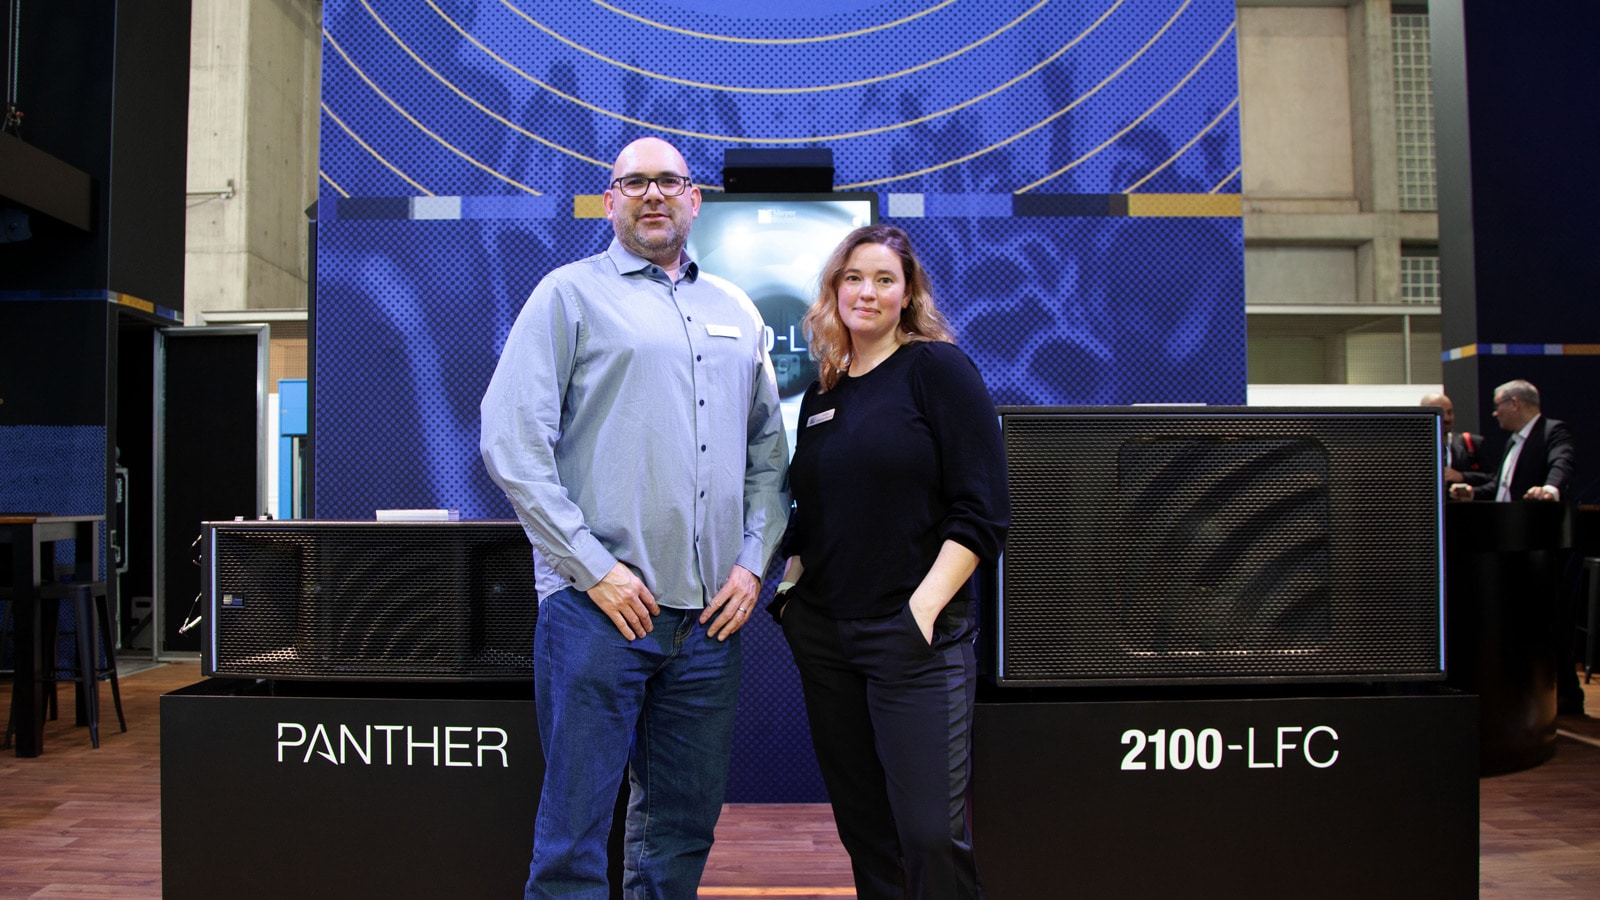 Andy Davies, Director of Product & Services and Katie Murphy Khulusi, Director of Loudspeaker Development